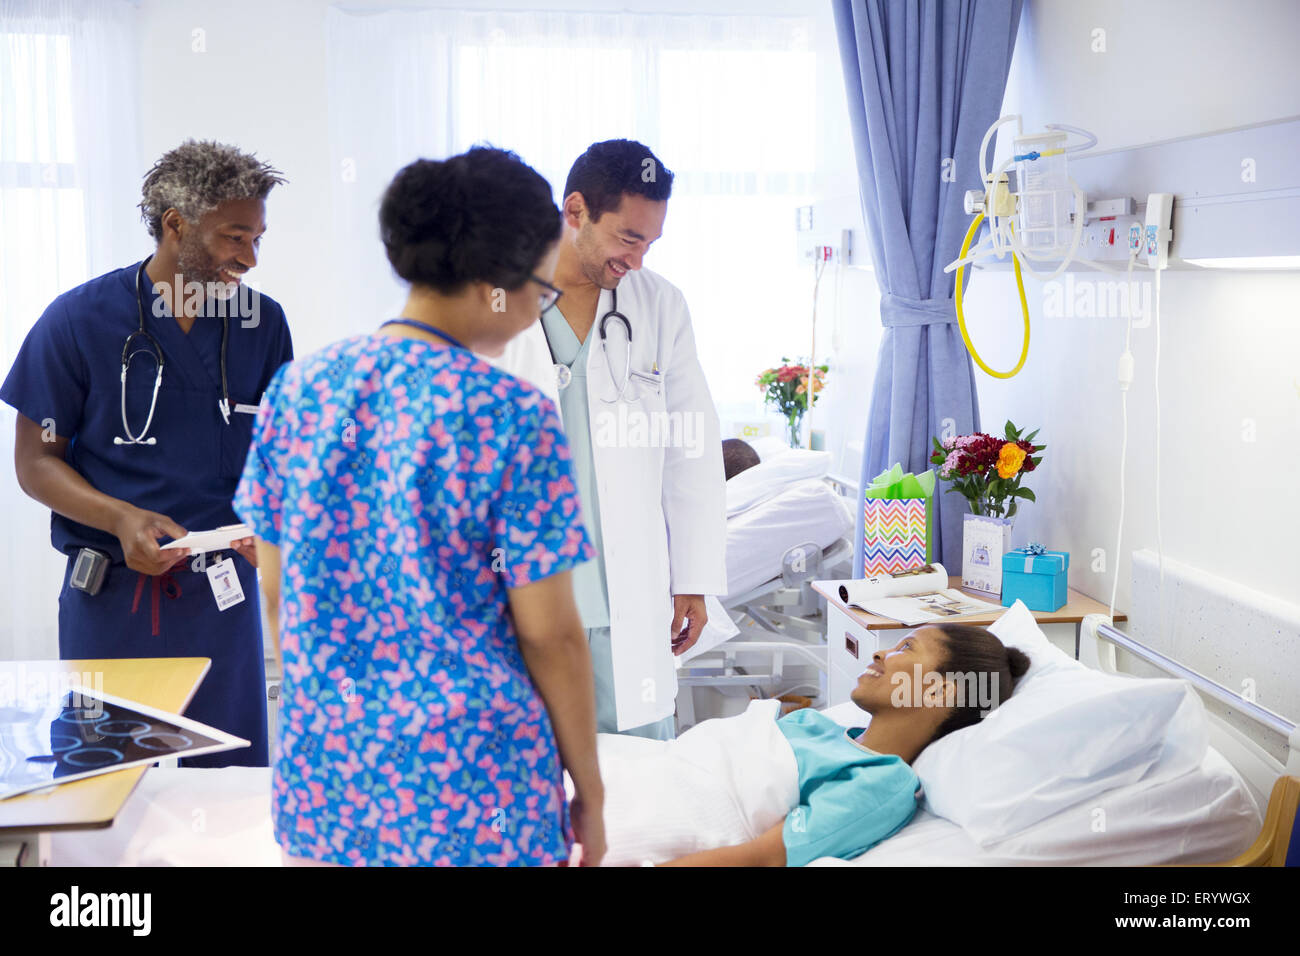 Doctors making rounds and talking with patient in hospital Stock Photo